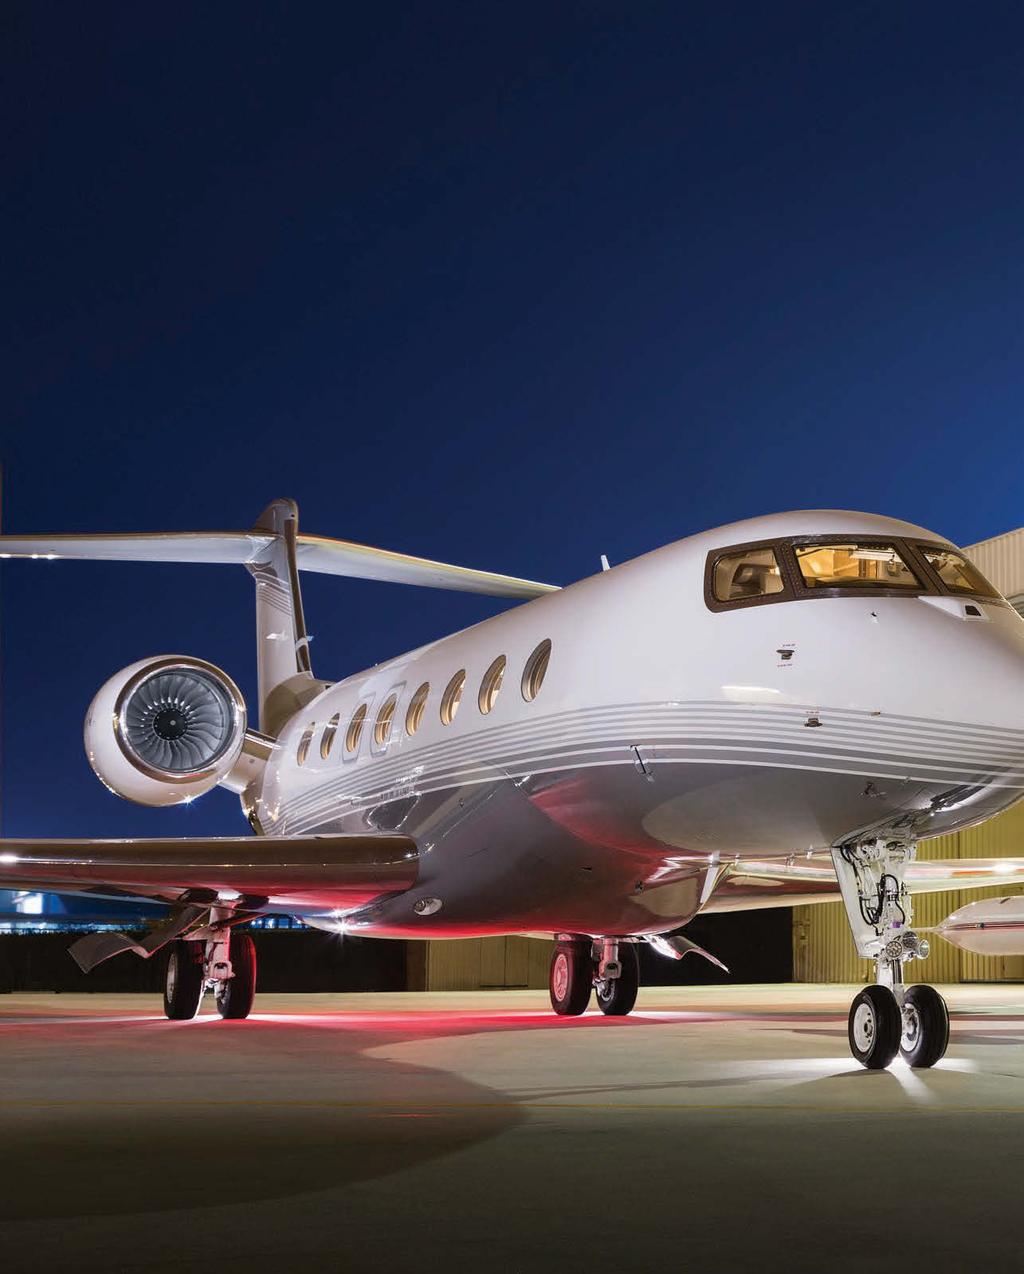 Record breaker Clay Lacy Aviation recently welcomed the all-new Gulfstream G650 to its diverse global charter fleet